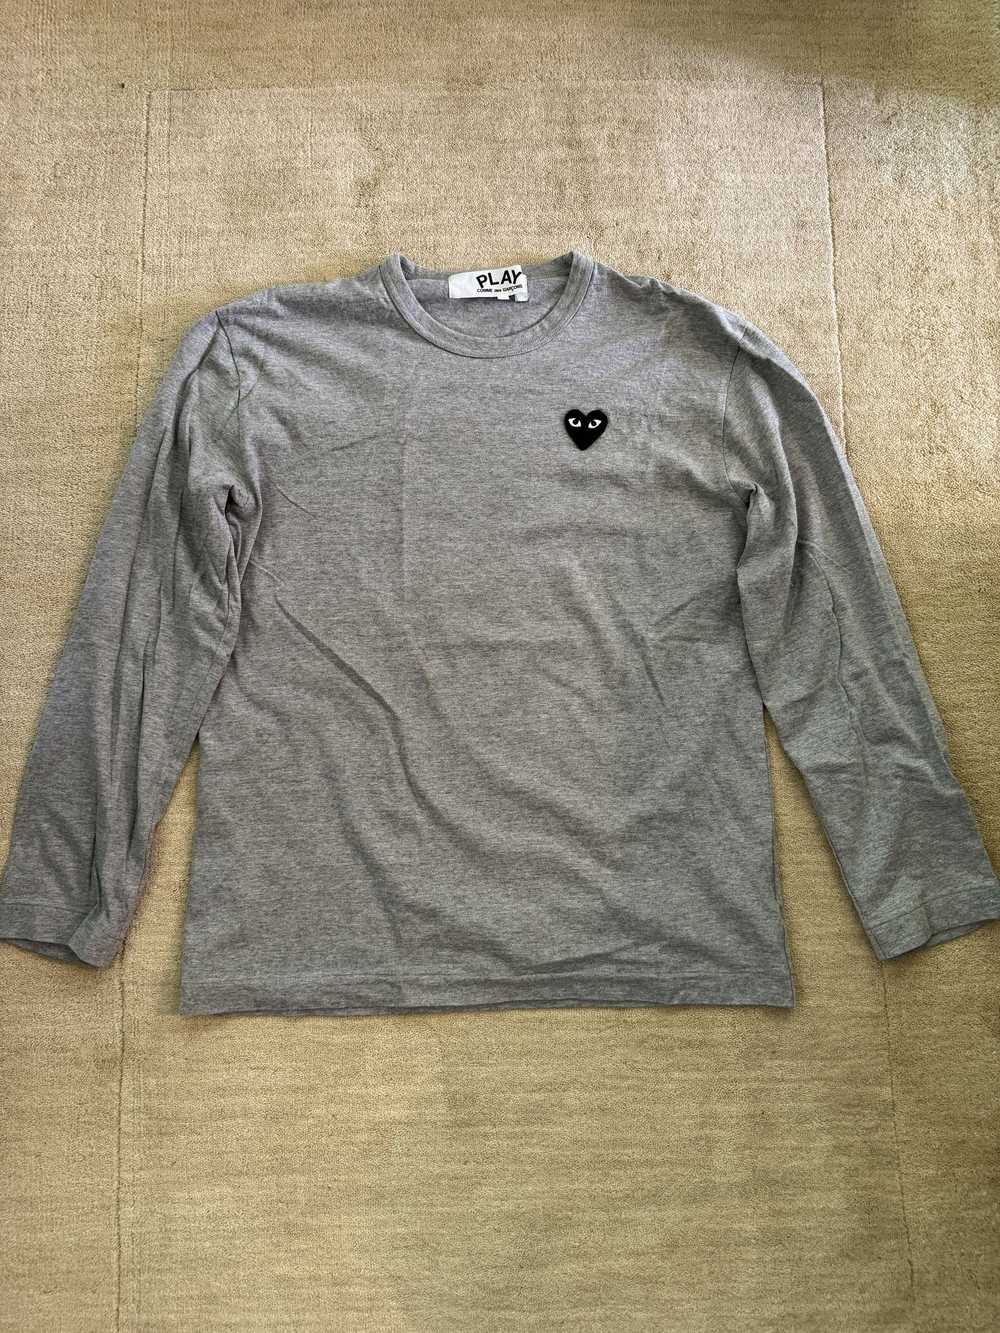 Comme Des Garcons Play CDG Play Long Sleeve Shirt - image 1